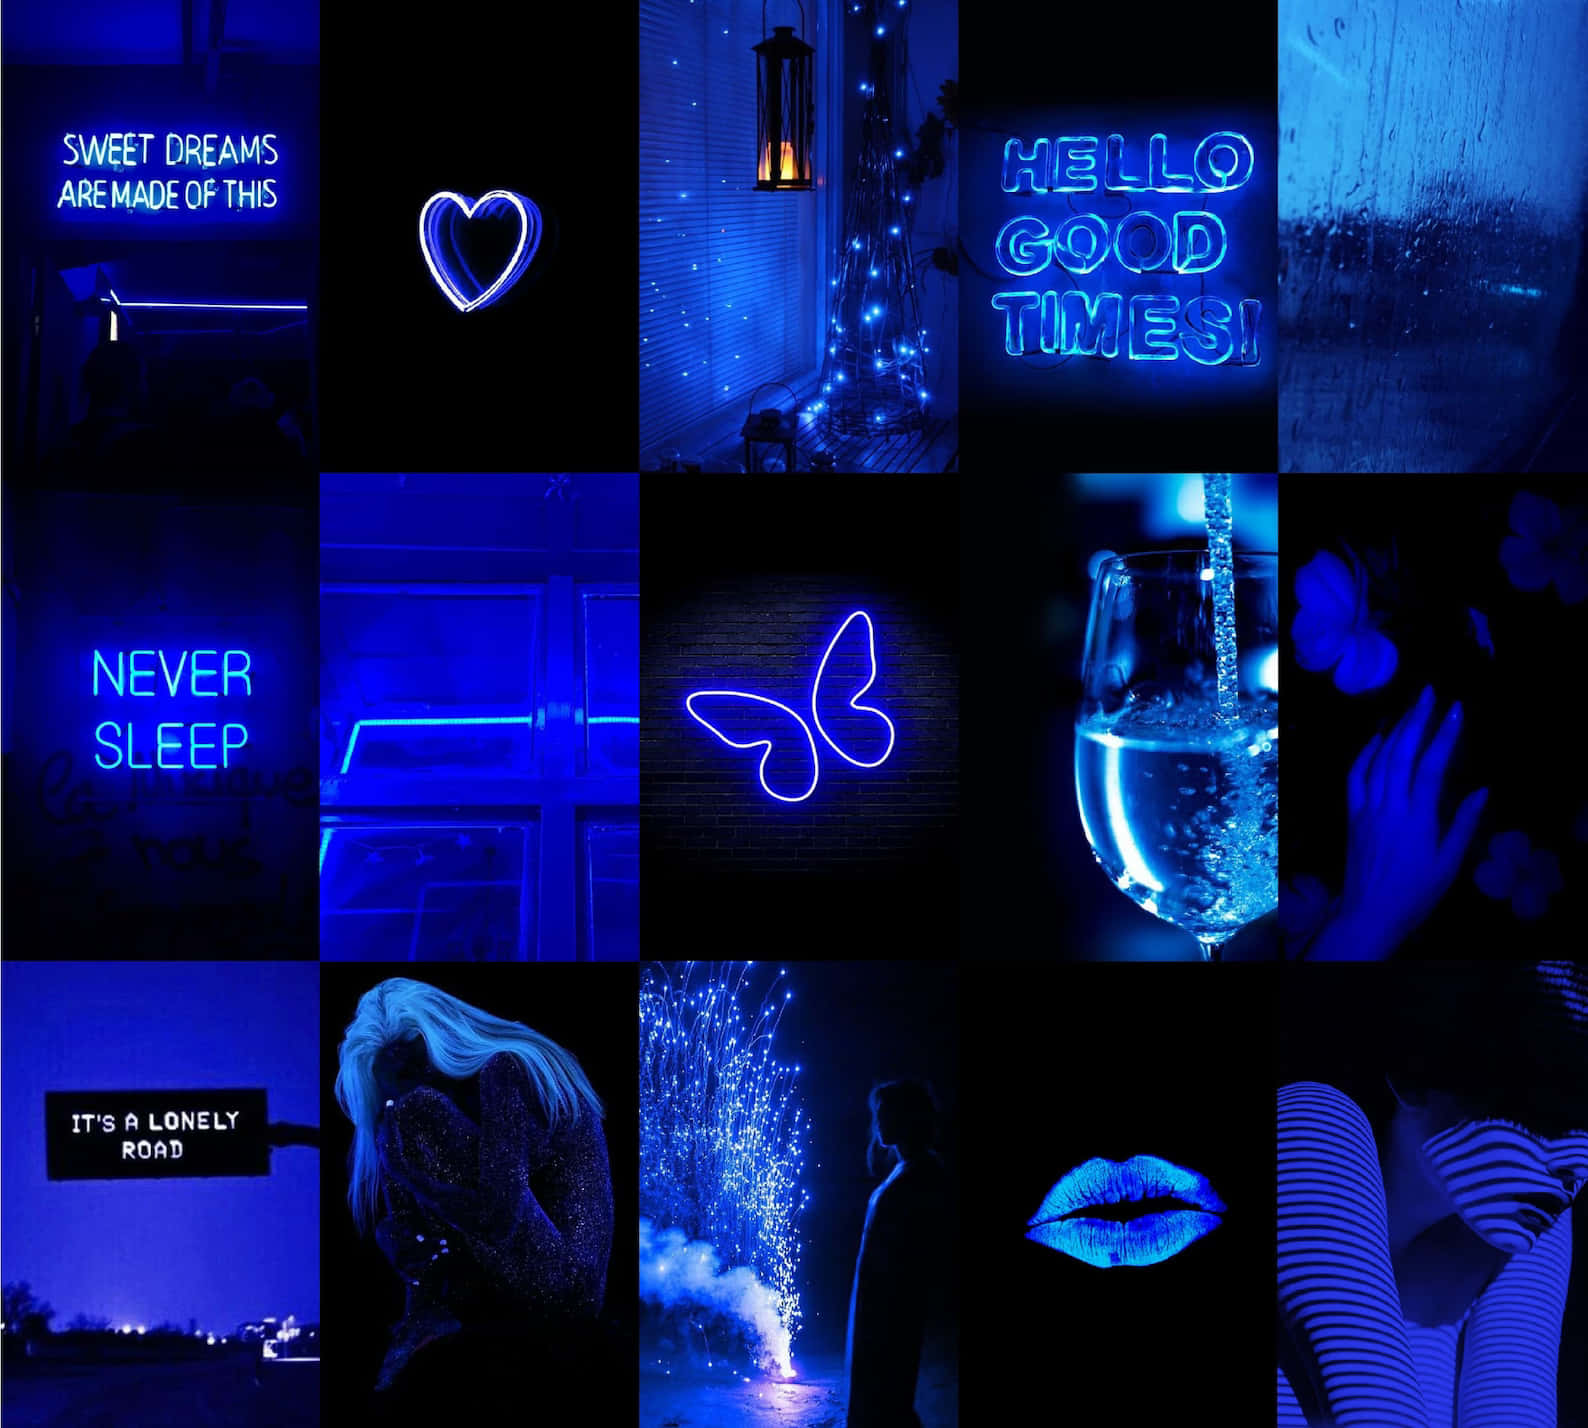 "Turn up the vibes with this neon blue aesthetic"